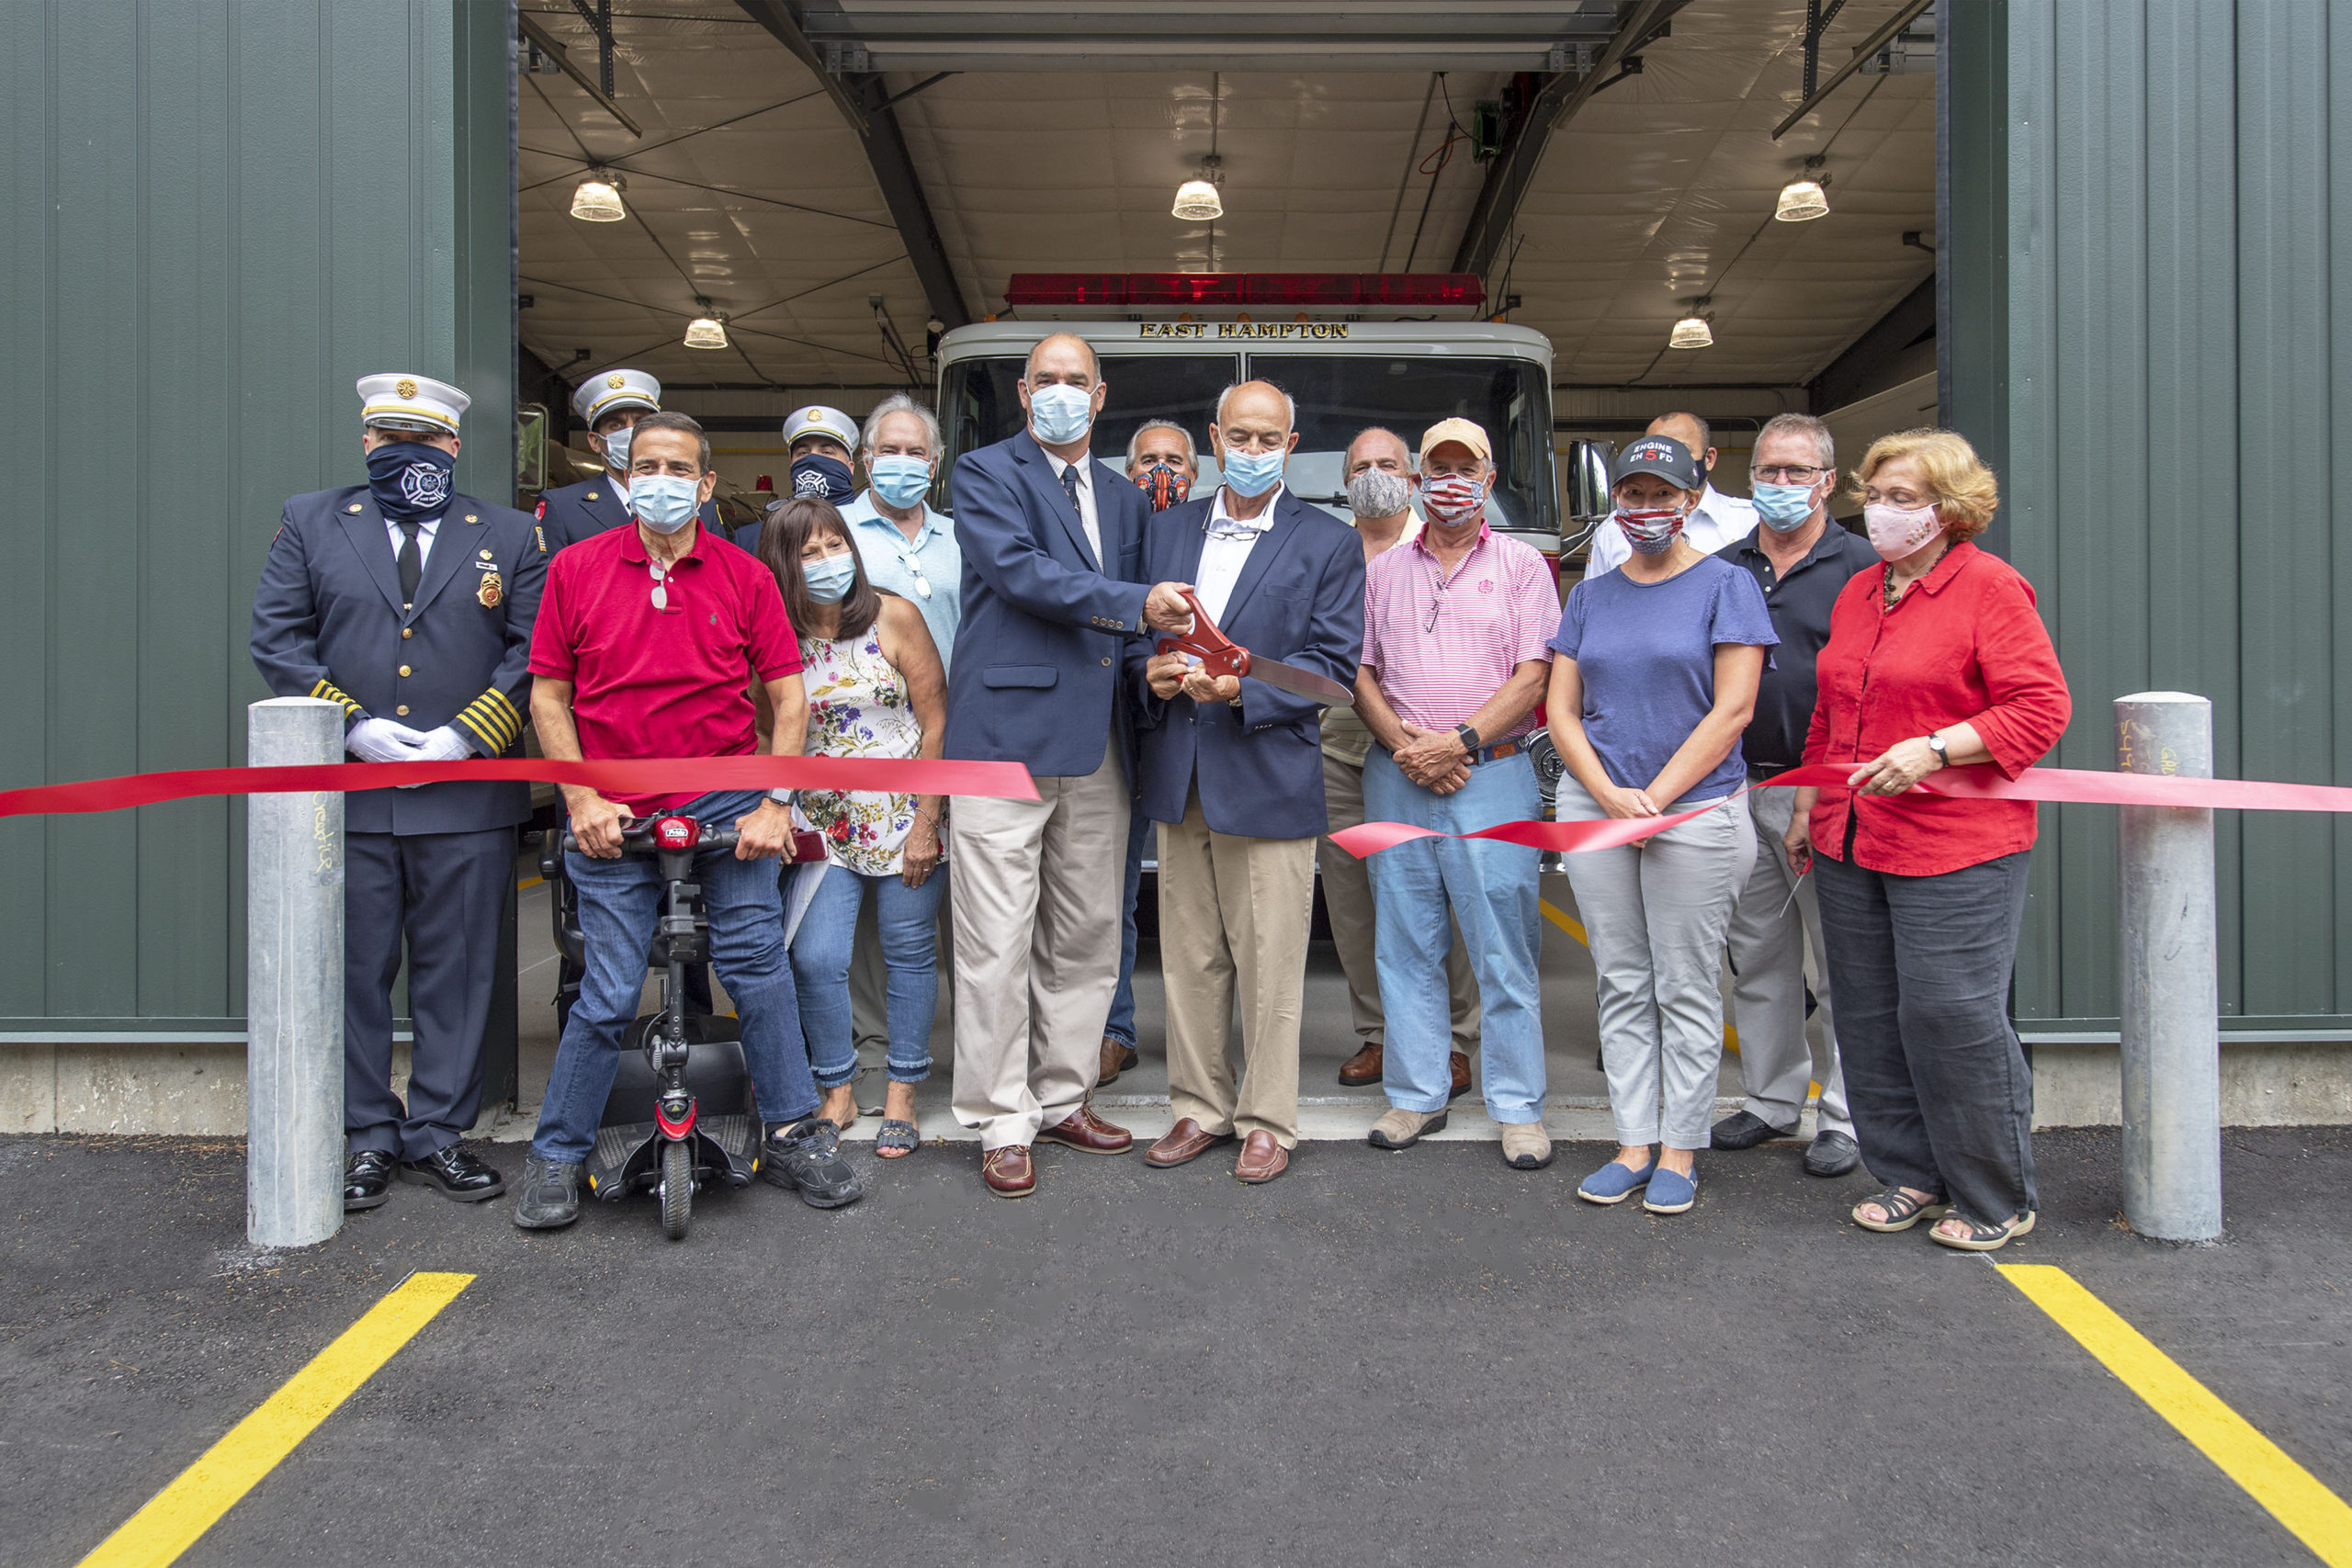 East Hampton Town Supervisor Peter Van Scoyoc and East Hampton Village Deputy Mayor Rick Lawler cut the ribbon during the ribbon-cutting ceremony for the new East Hampton Fire Department substation at 18 Old Northwest Road on Friday.   MICHAEL HELLER